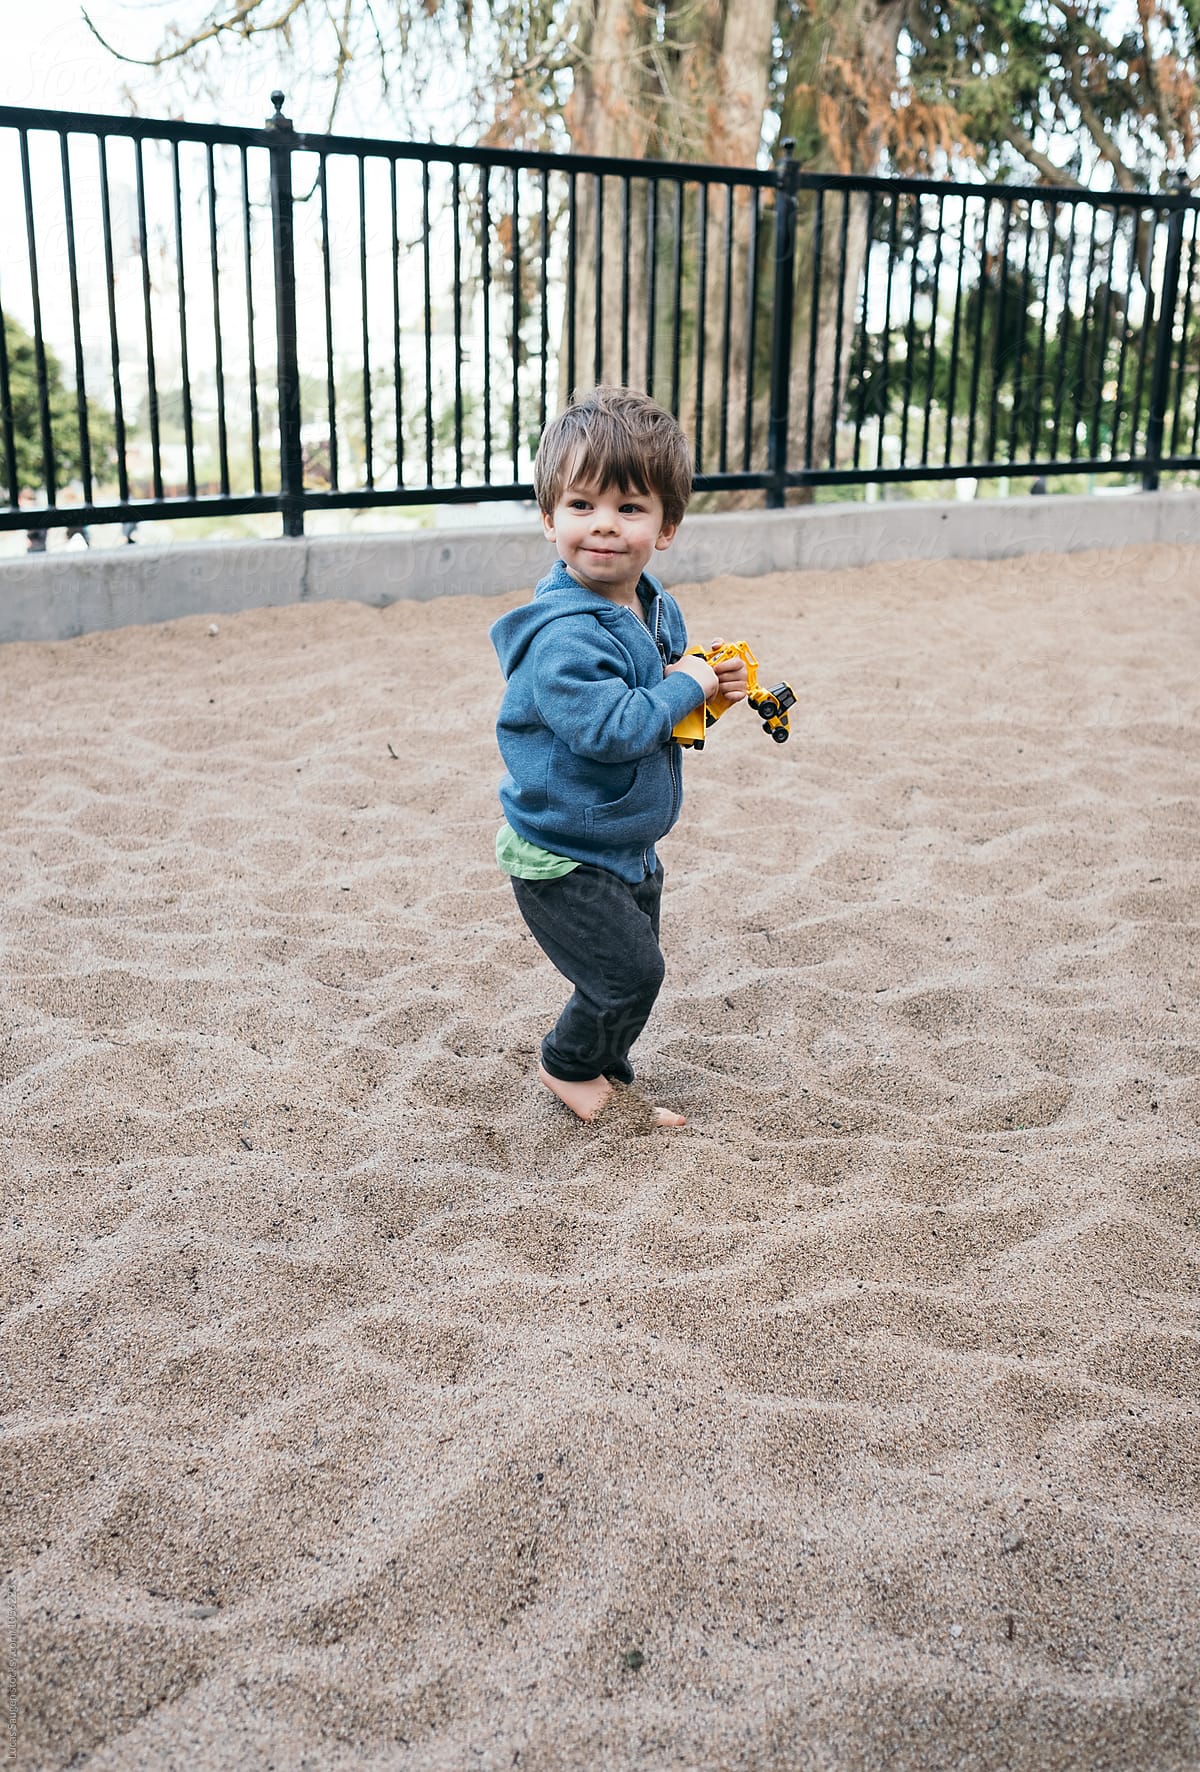 Young boy happy in a very large sand box with a small construction toy.